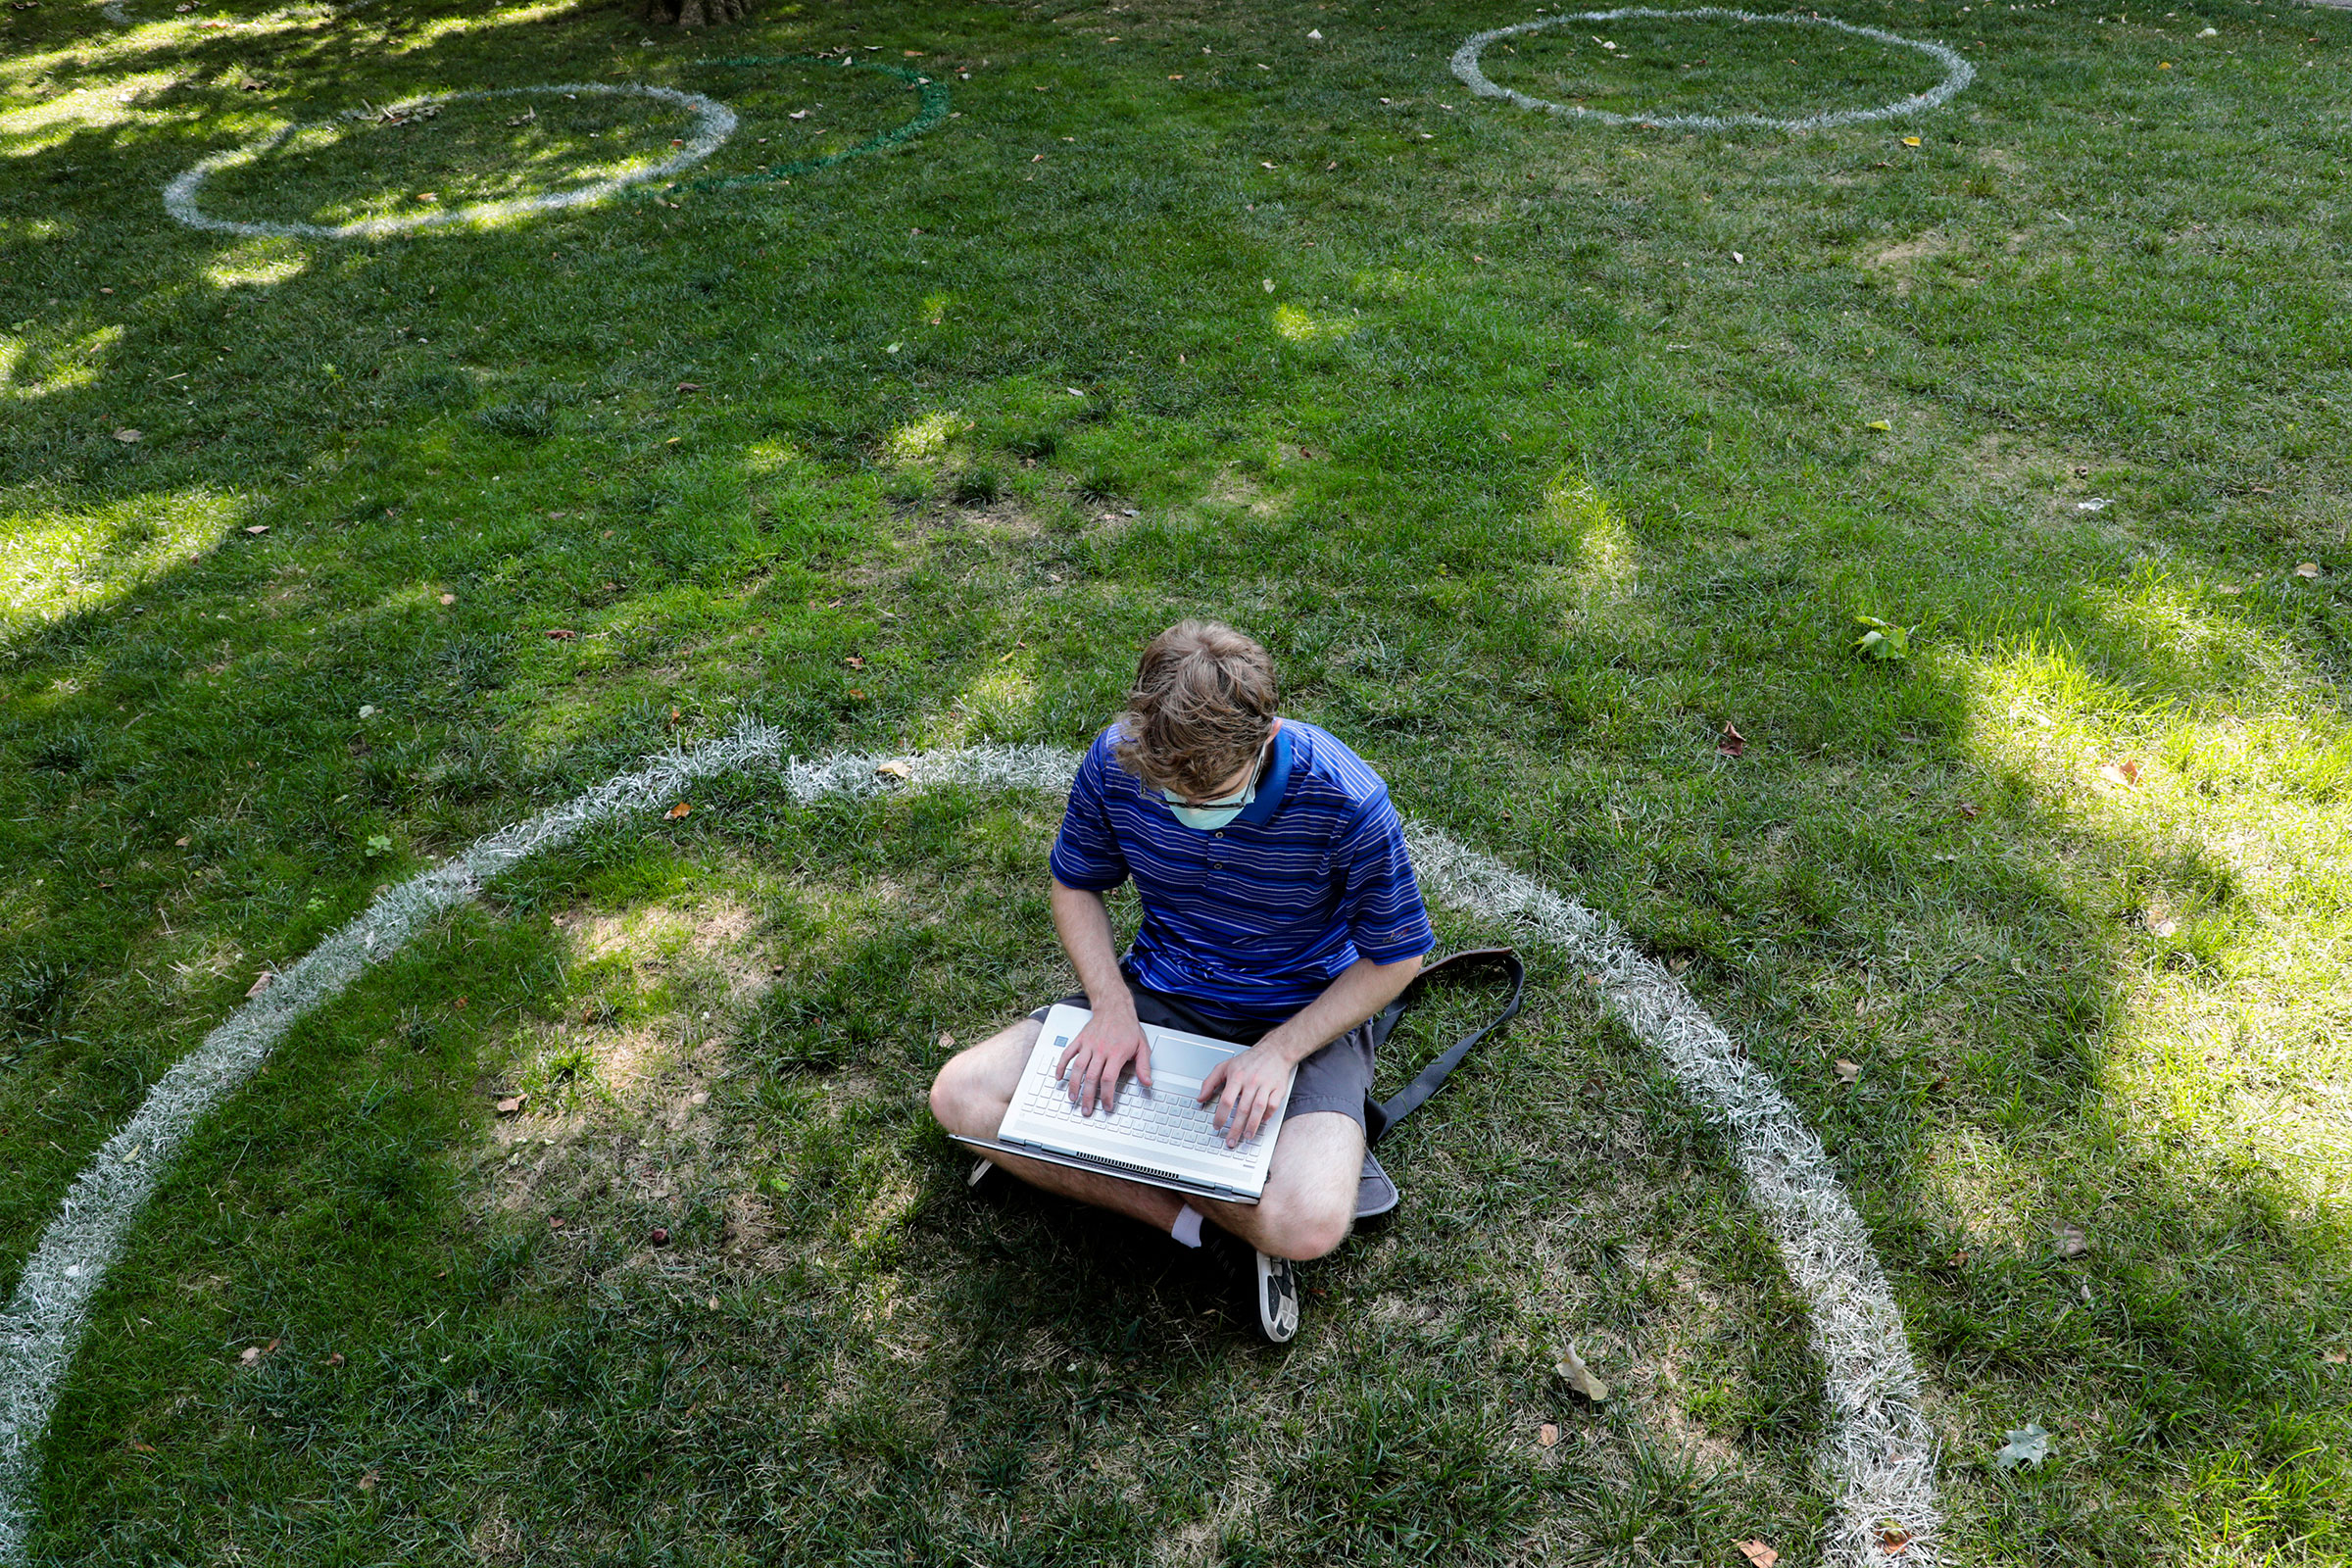 Logan Armstrong, a Cincinnati junior, works while sitting inside a painted circle on the lawn of the Oval during the first day of fall classes on at Ohio State University on Aug. 25, 2020. (Joshua A. Bickel—The Columbus Dispatch/AP)